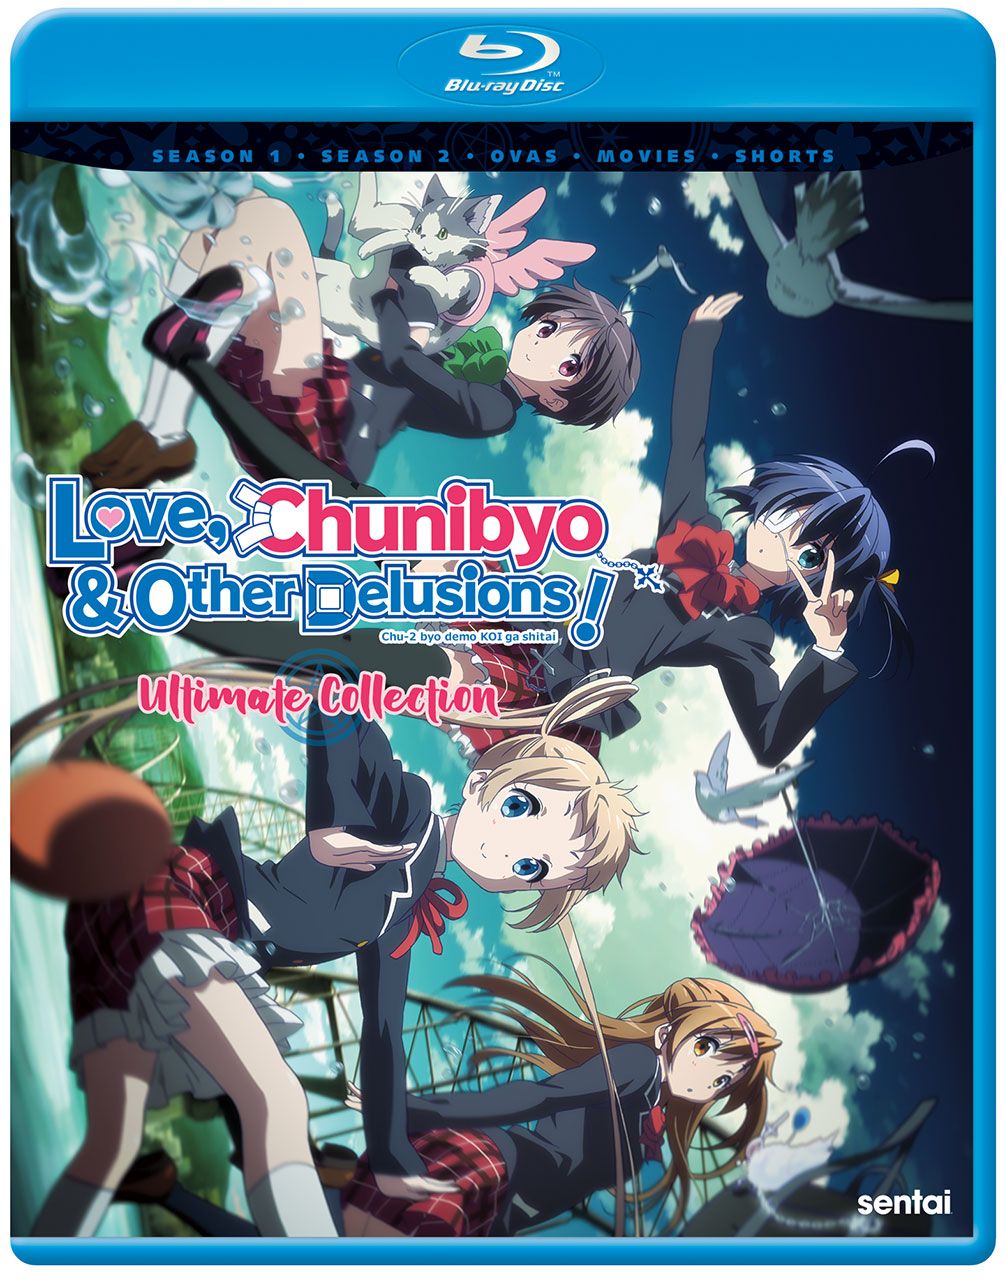 Love, Chunibyo & Other Delusions. Blu-ray cover art provided by Sentai.